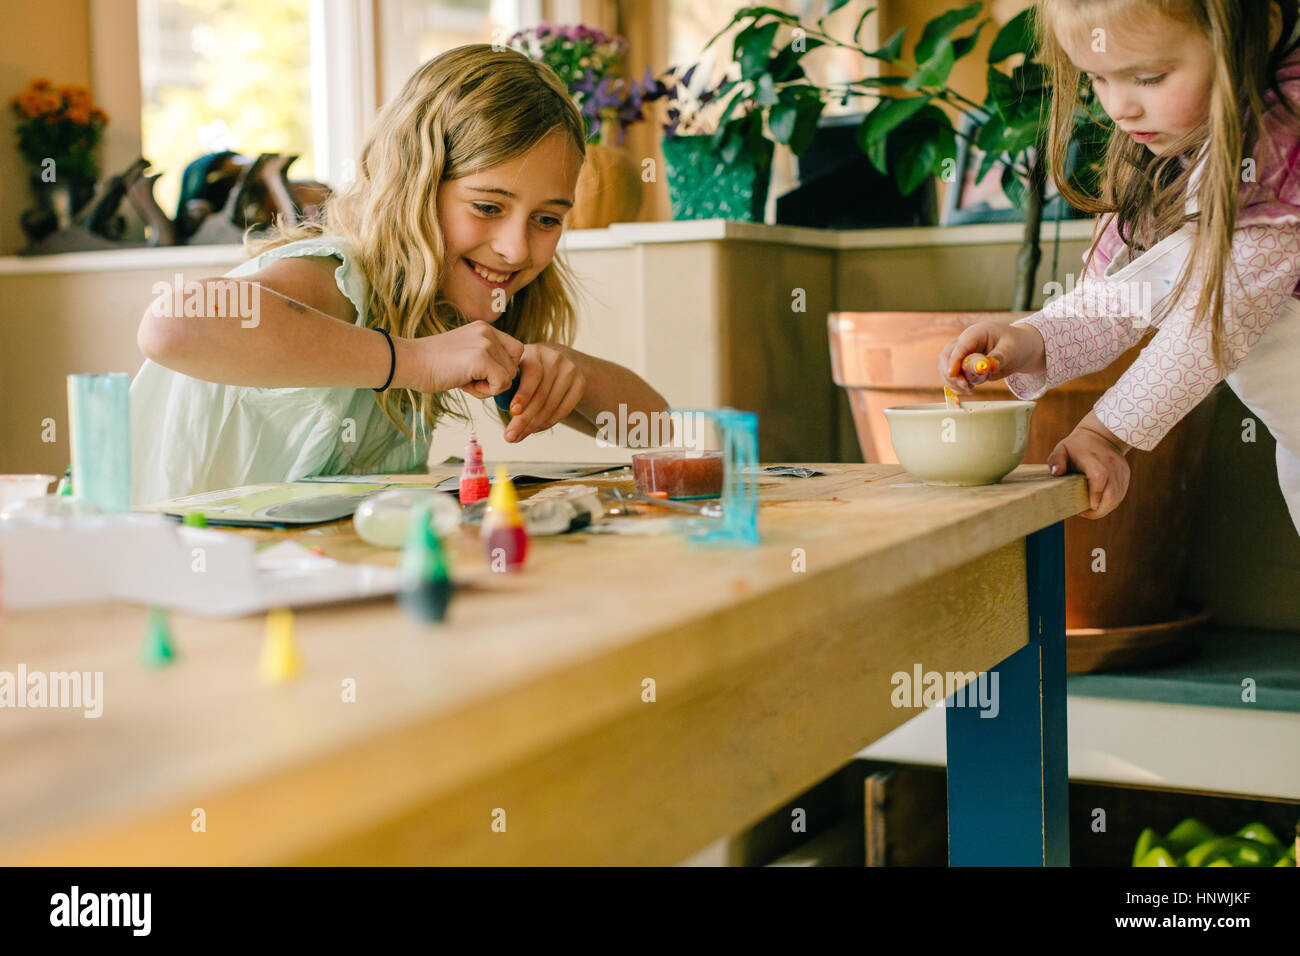 Two girls doing science experiment at table Stock Photo